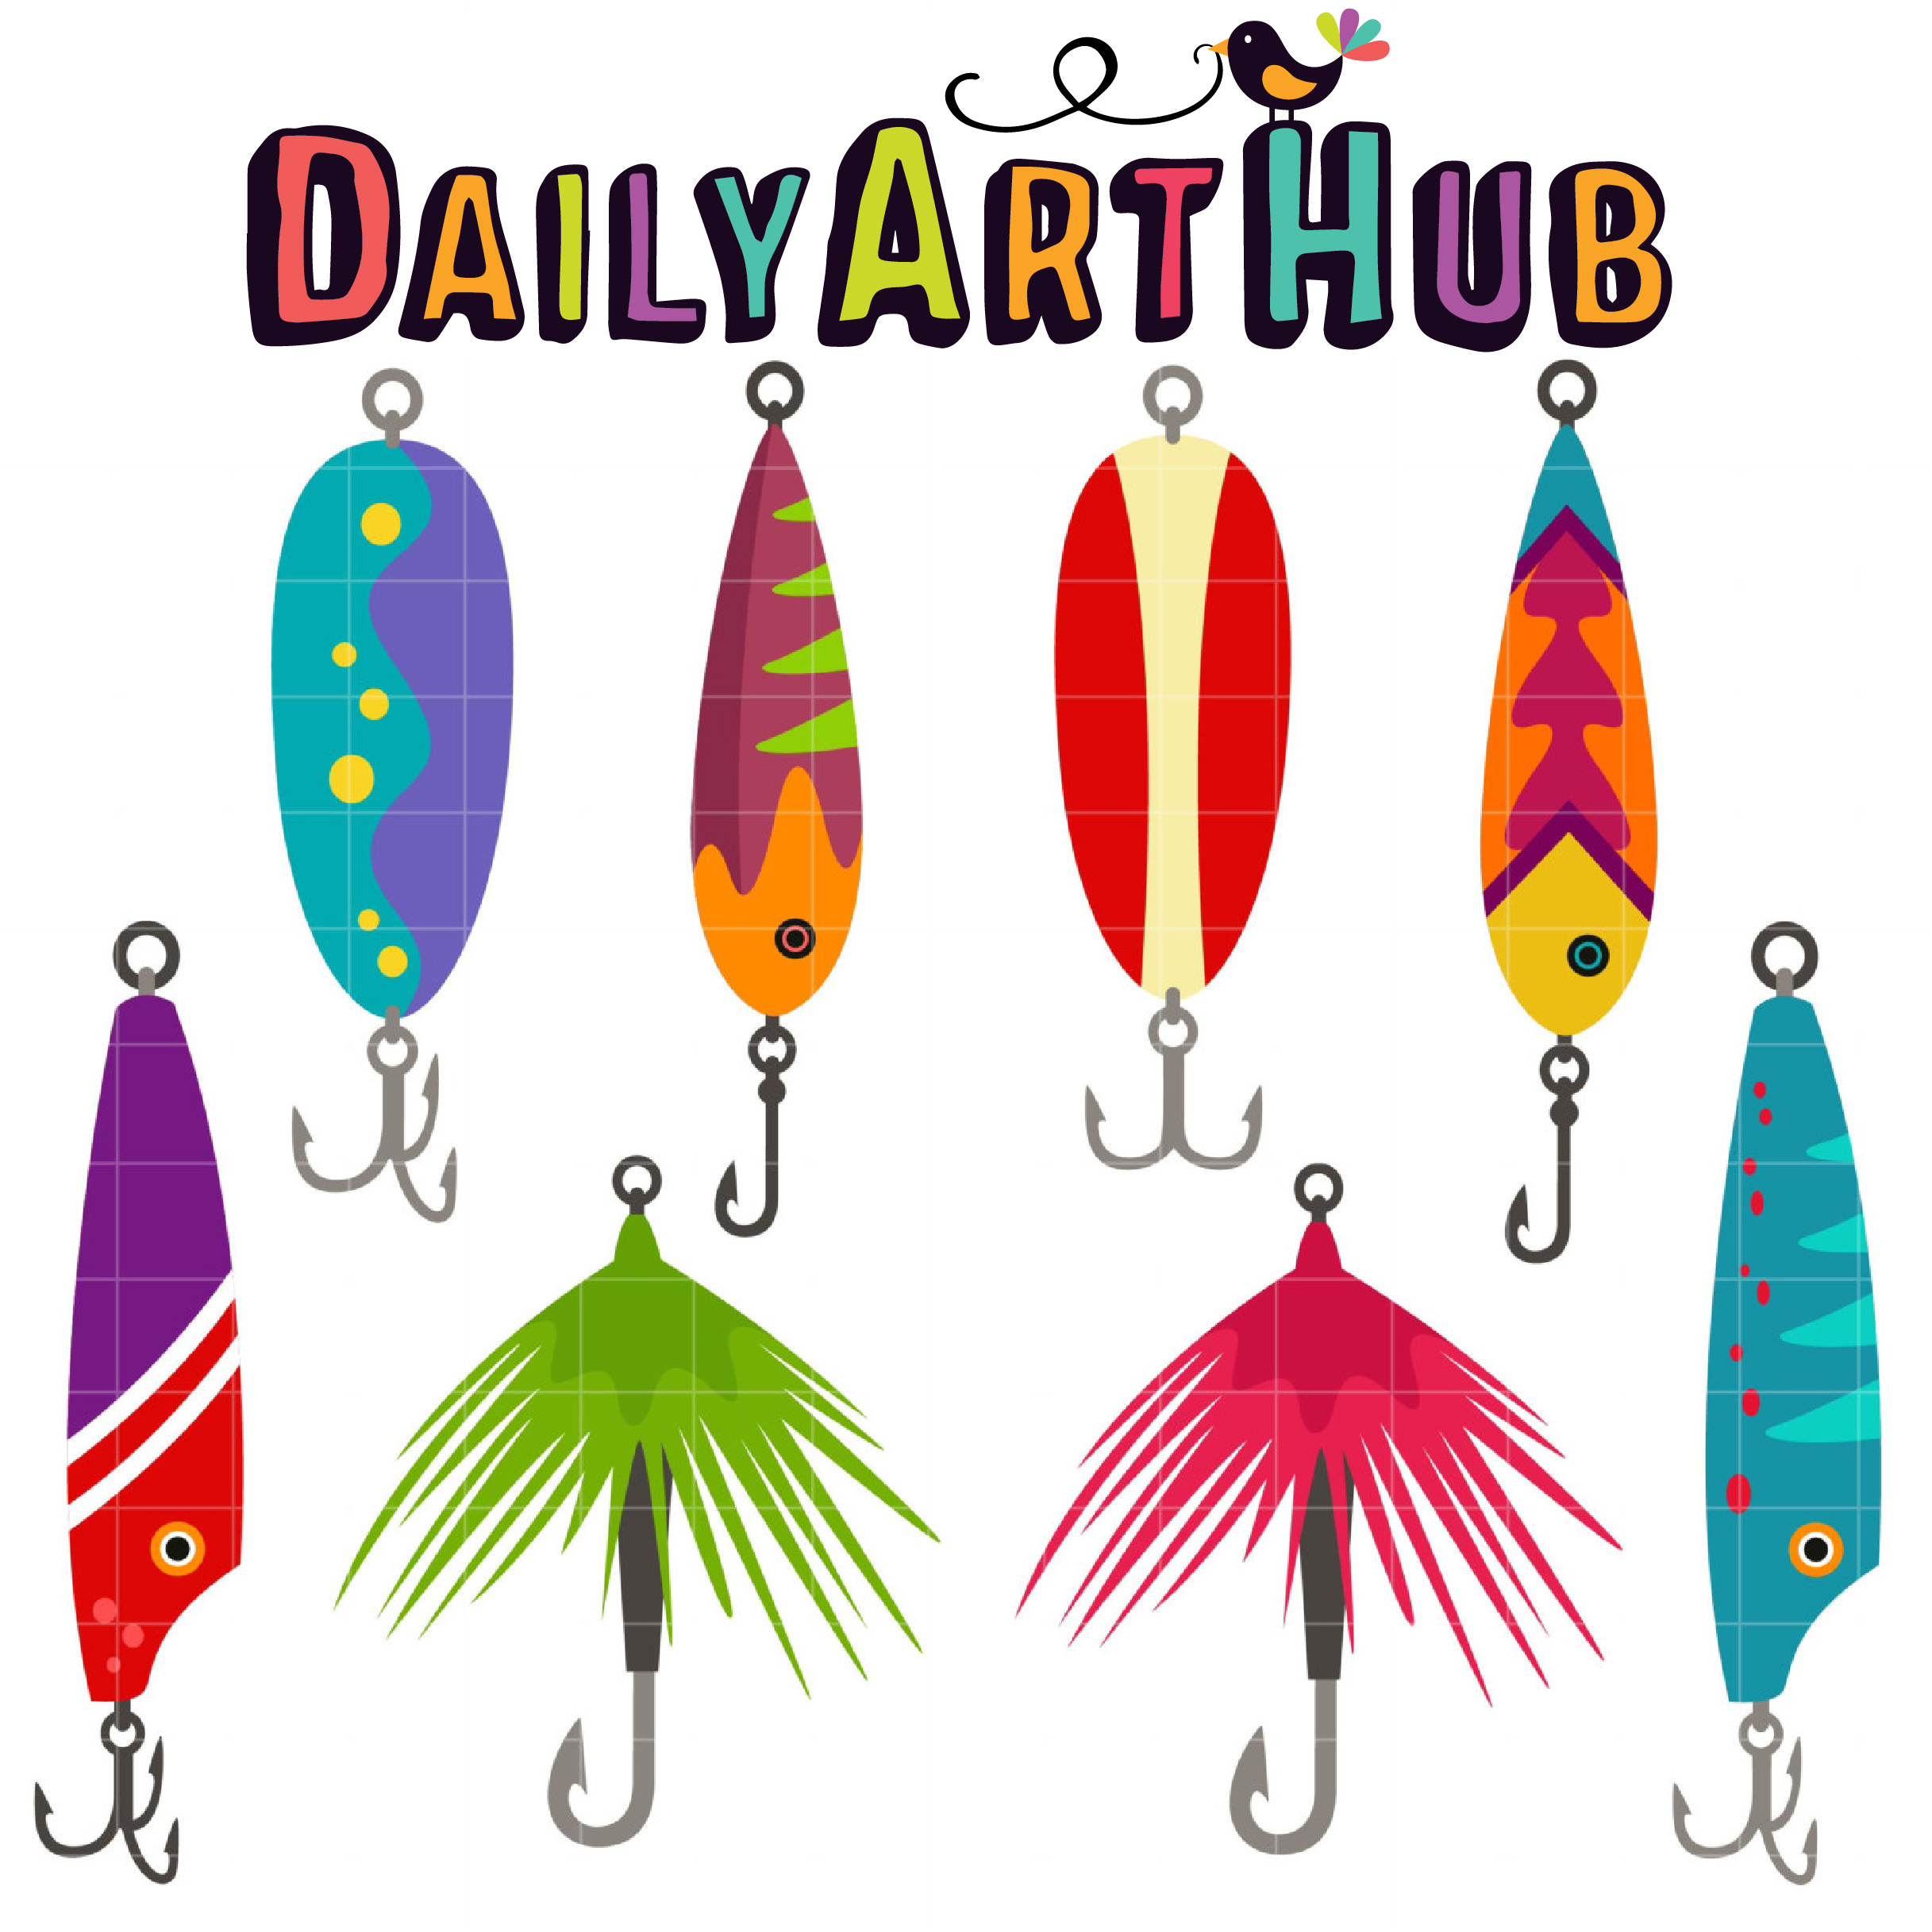 Download Fishing Lures Clip Art Set Daily Art Hub Free Clip Art Everyday